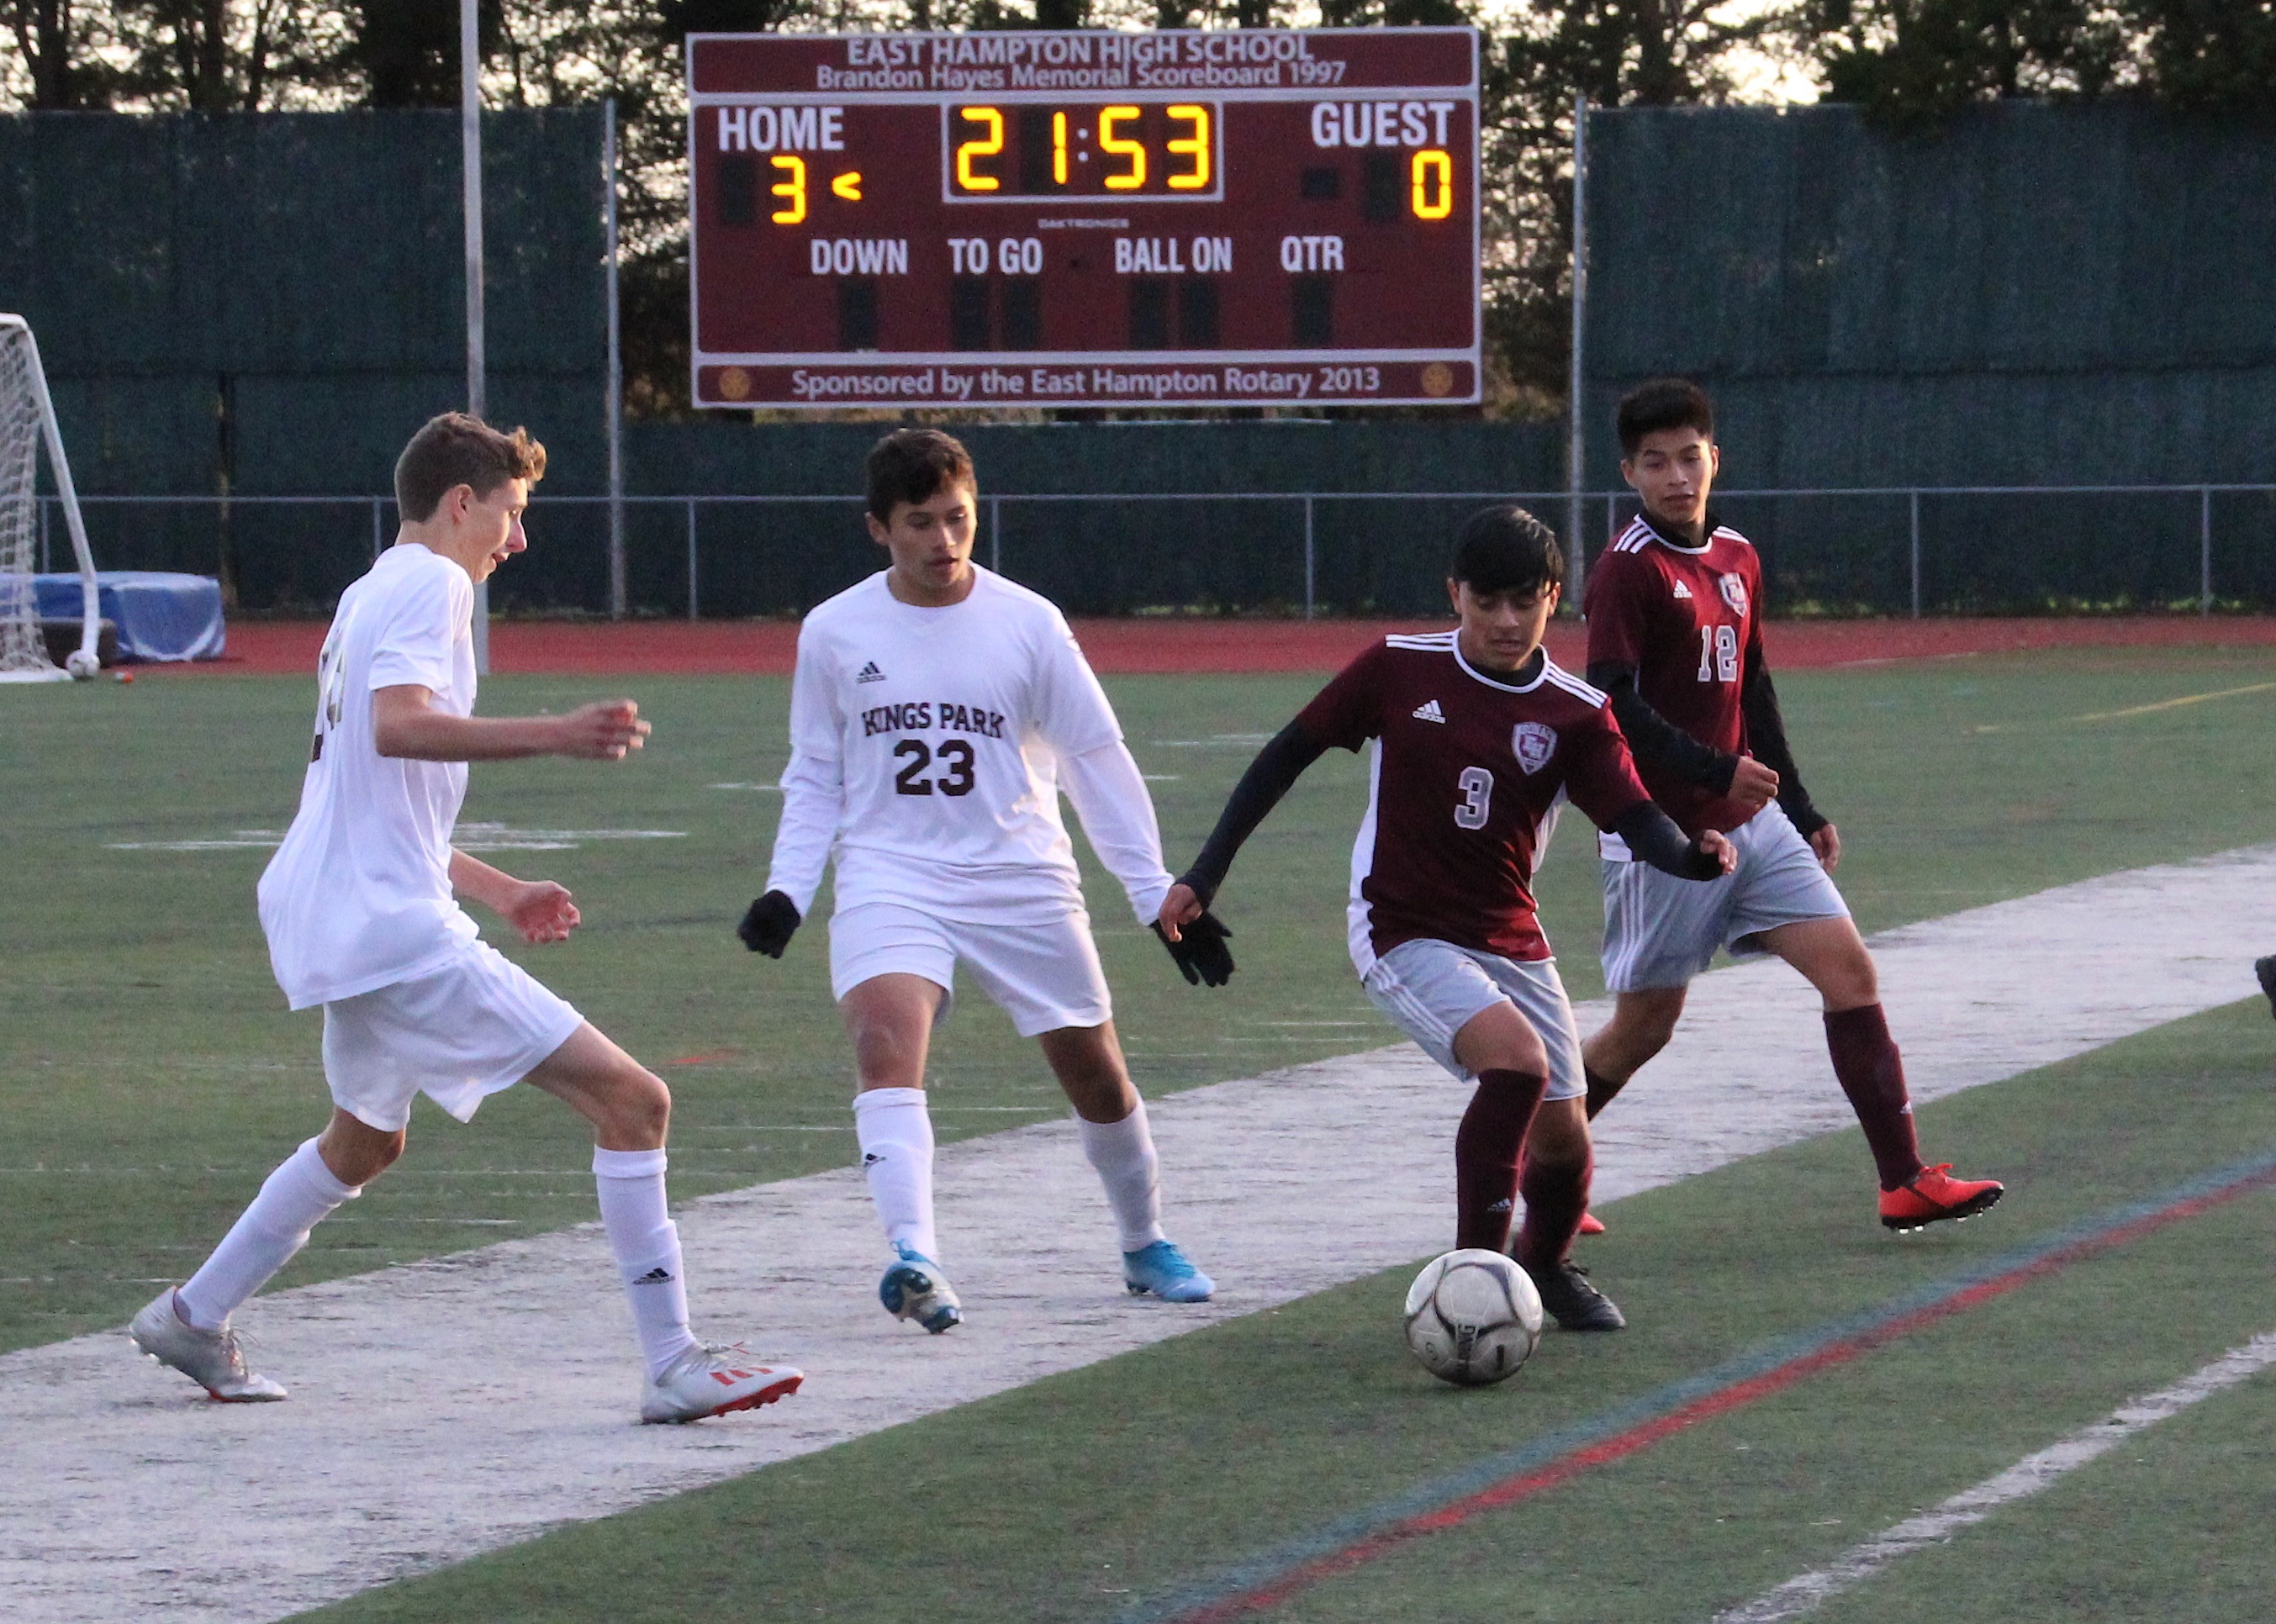 East Hampton junior Anthony Mermeo plays the ball with his team leading 3-0 in the second half.